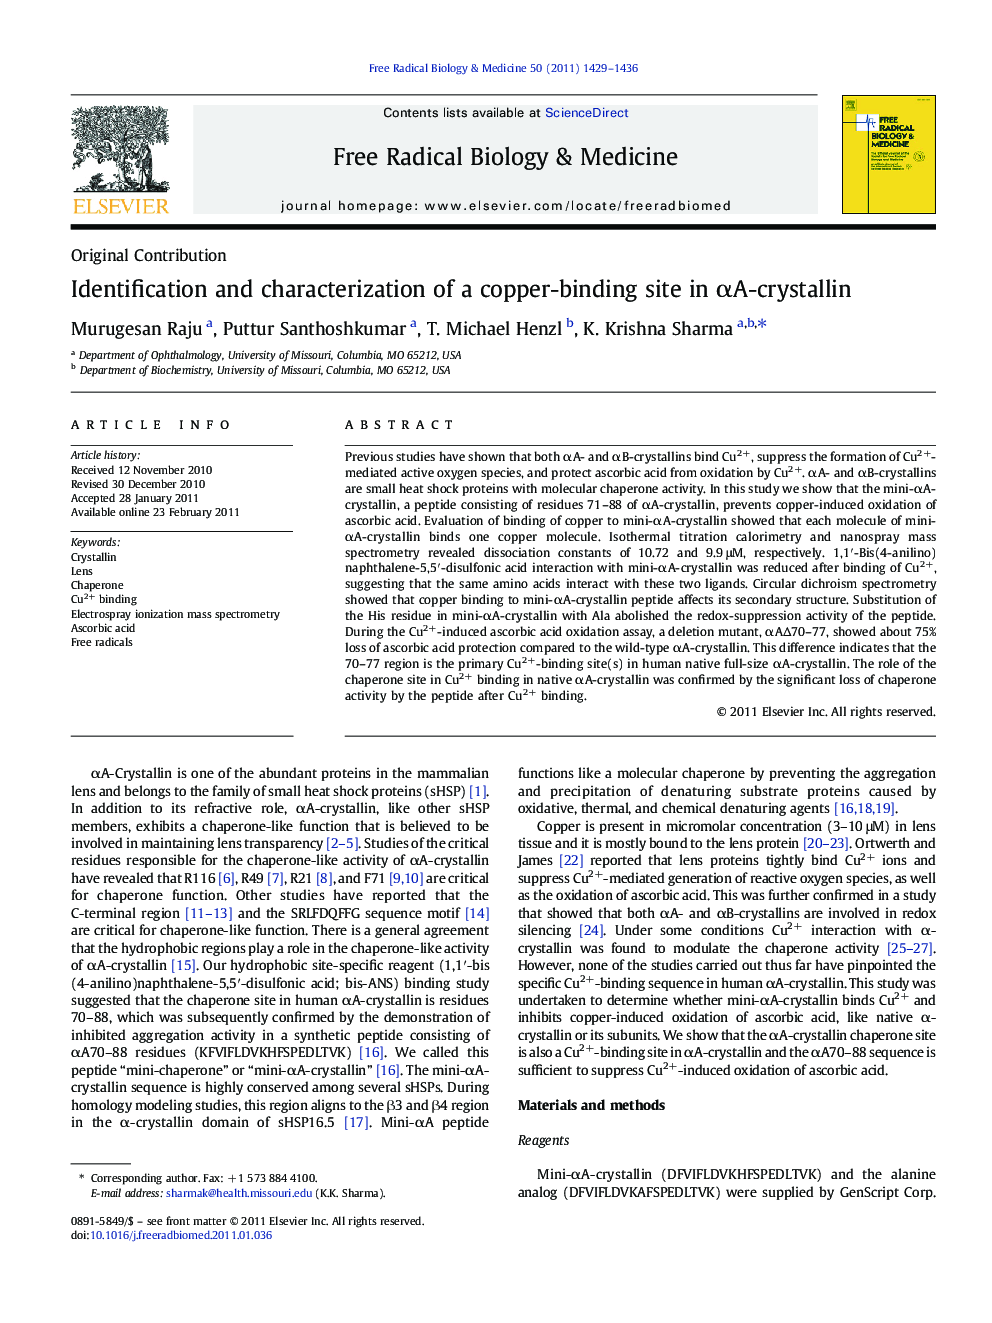 Identification and characterization of a copper-binding site in Î±A-crystallin